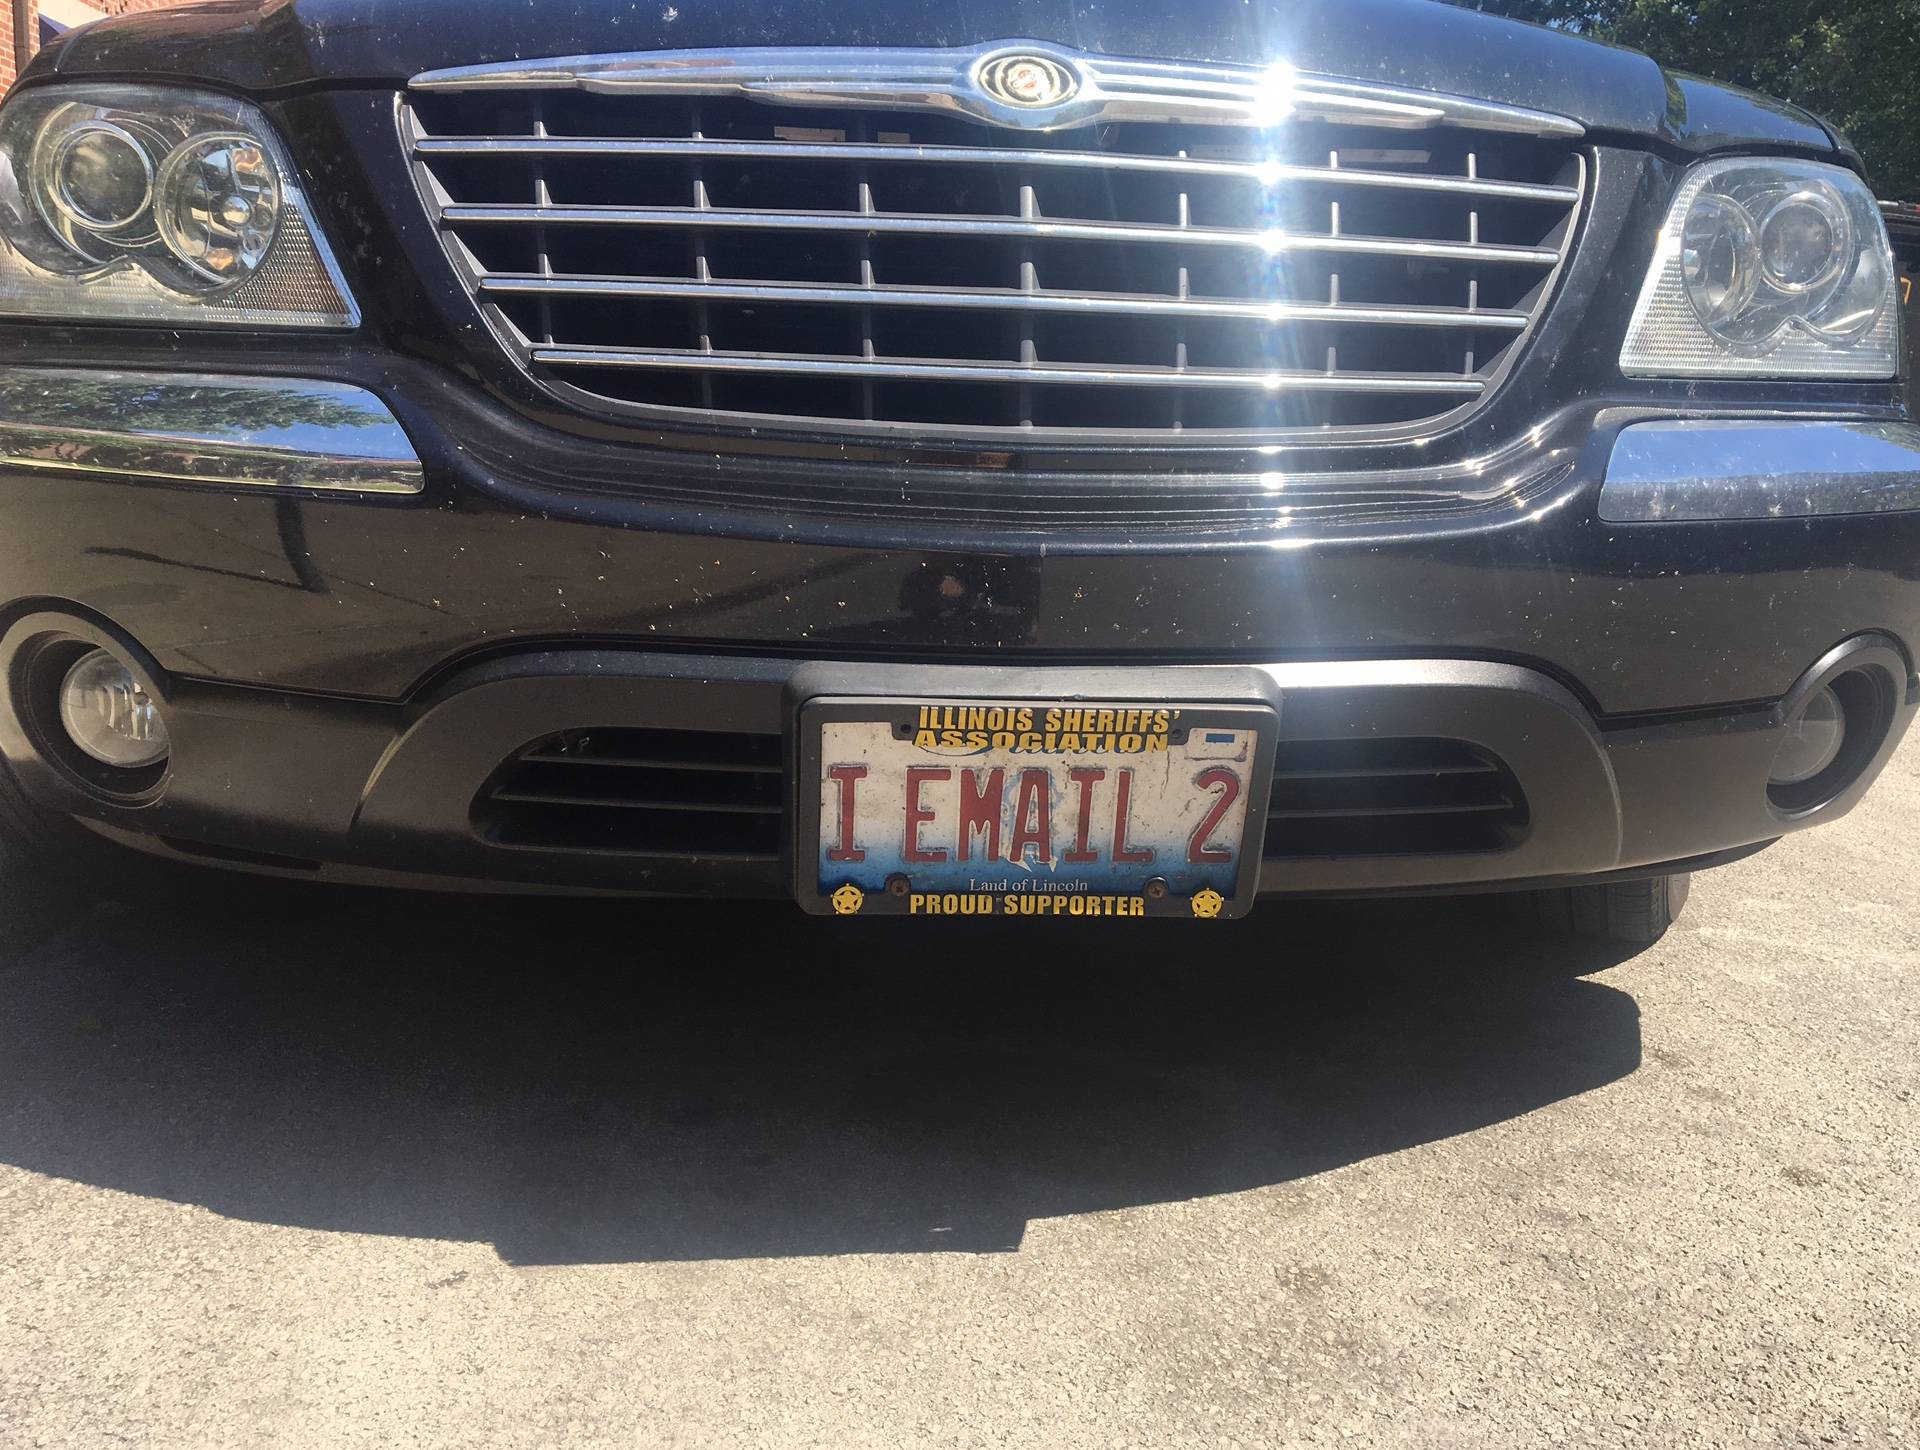 League of extraordinary license plates